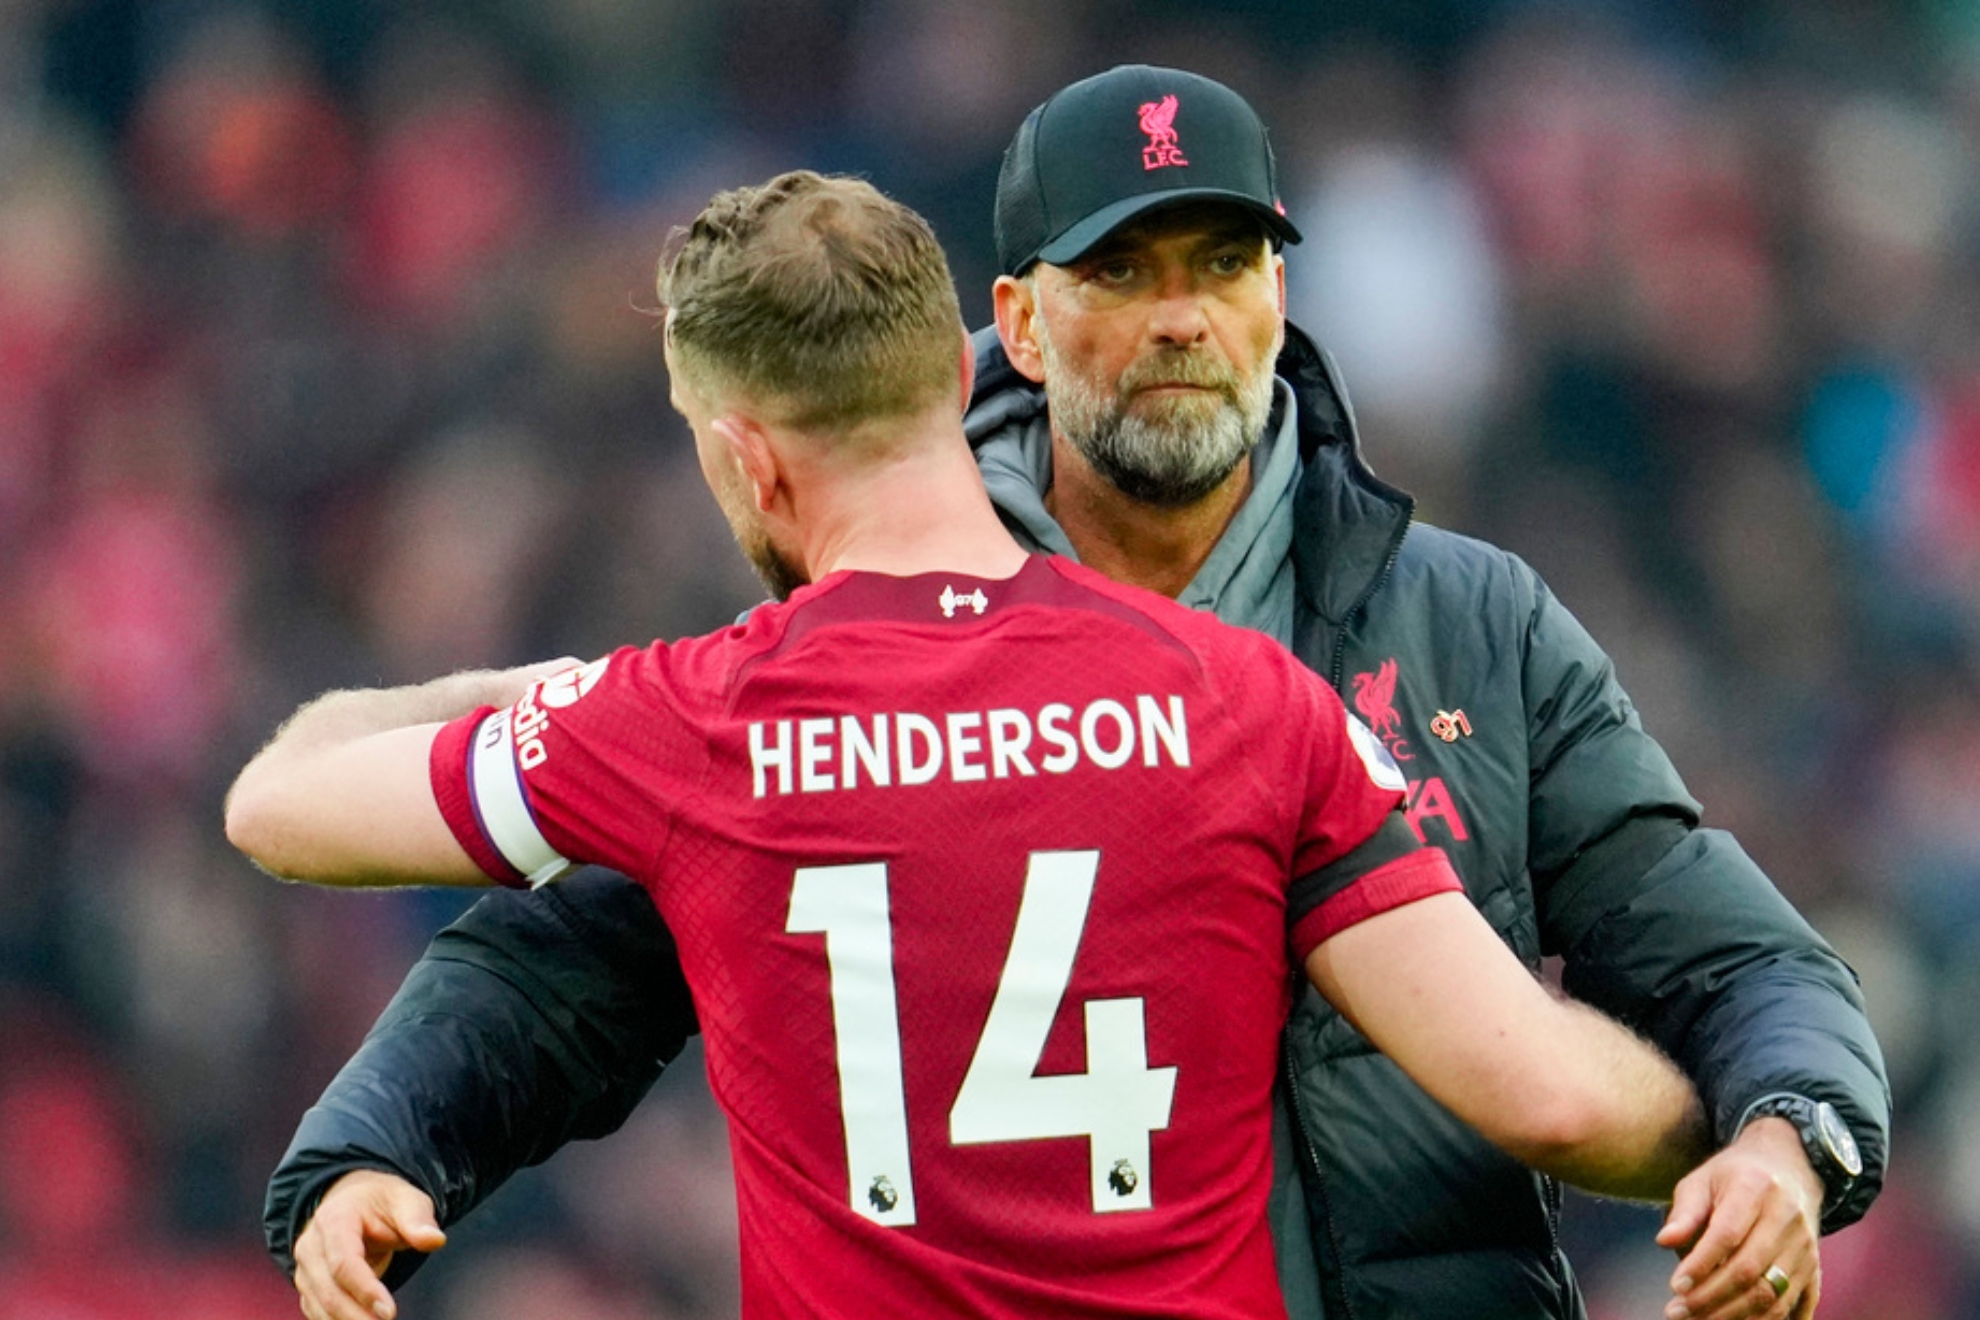 Klopp will have a say in the future of Henderson